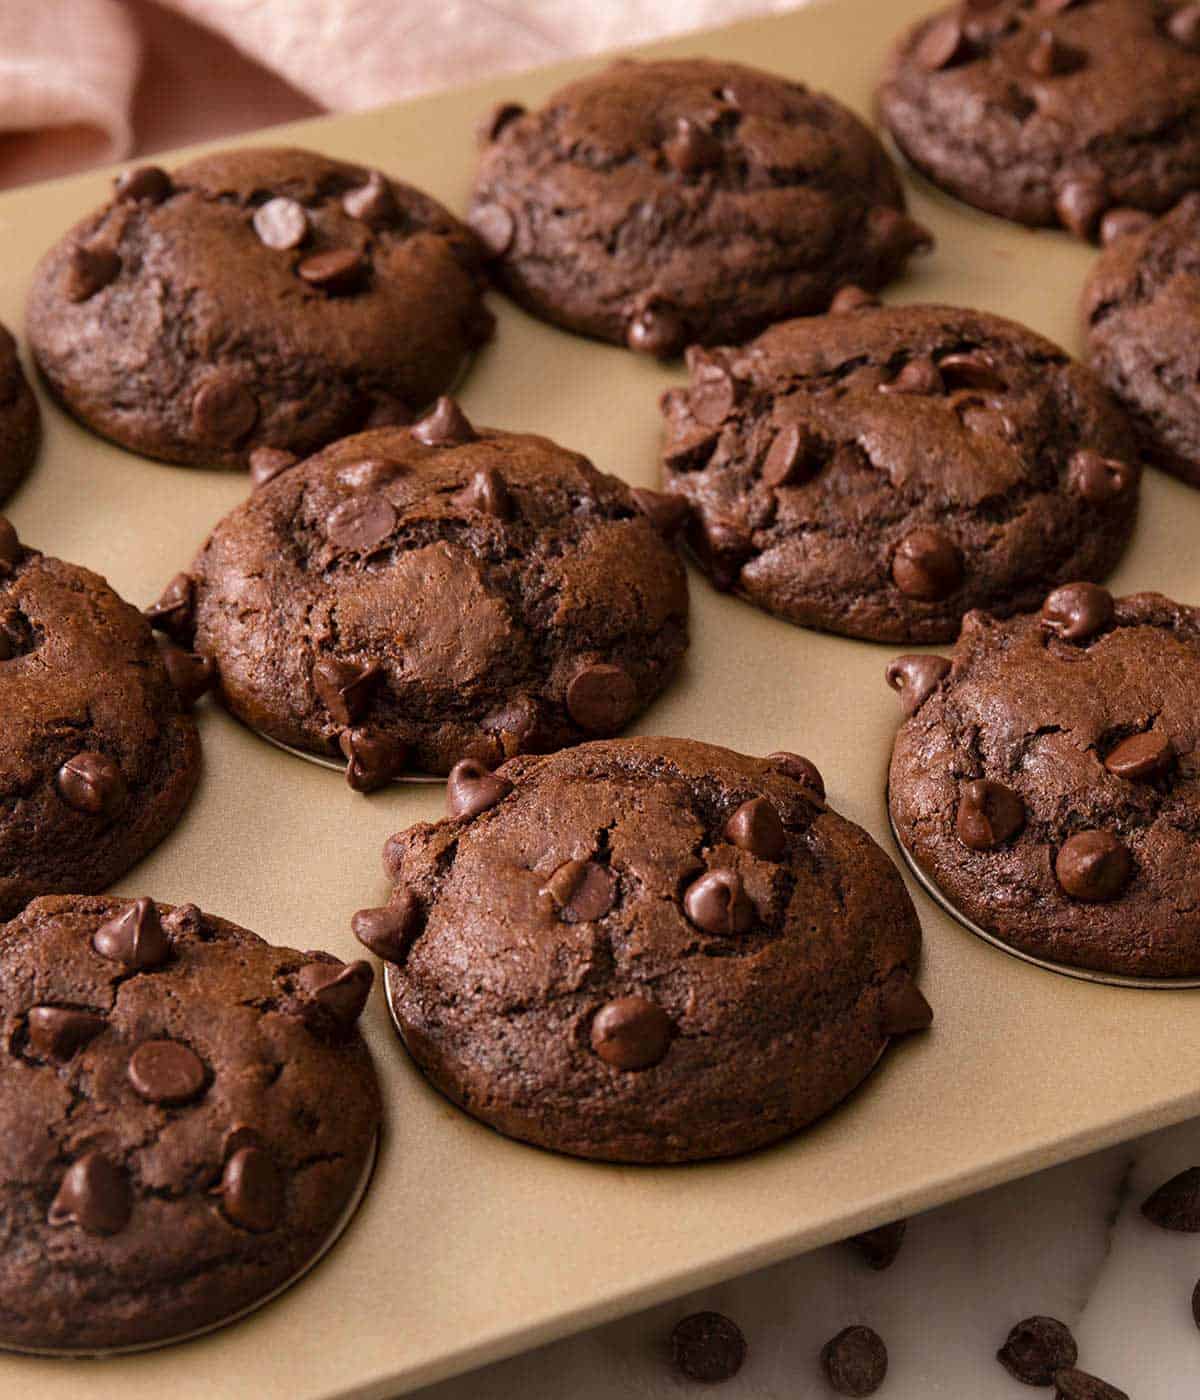 A close up of baked chocolate muffins in a muffin pan